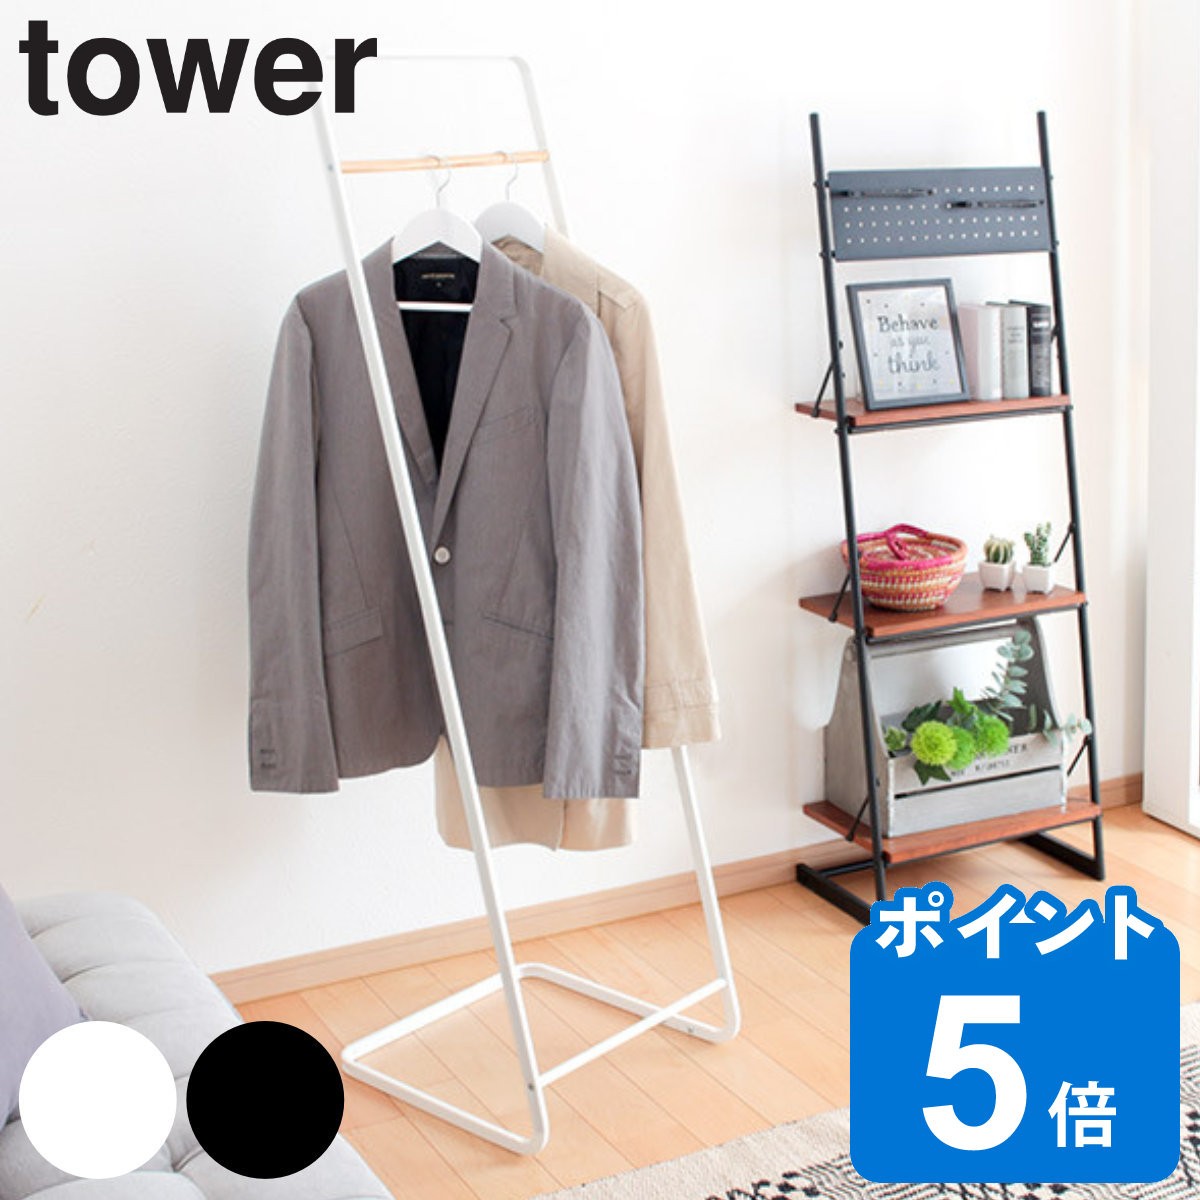 tower R[gnK[ ^[ KD